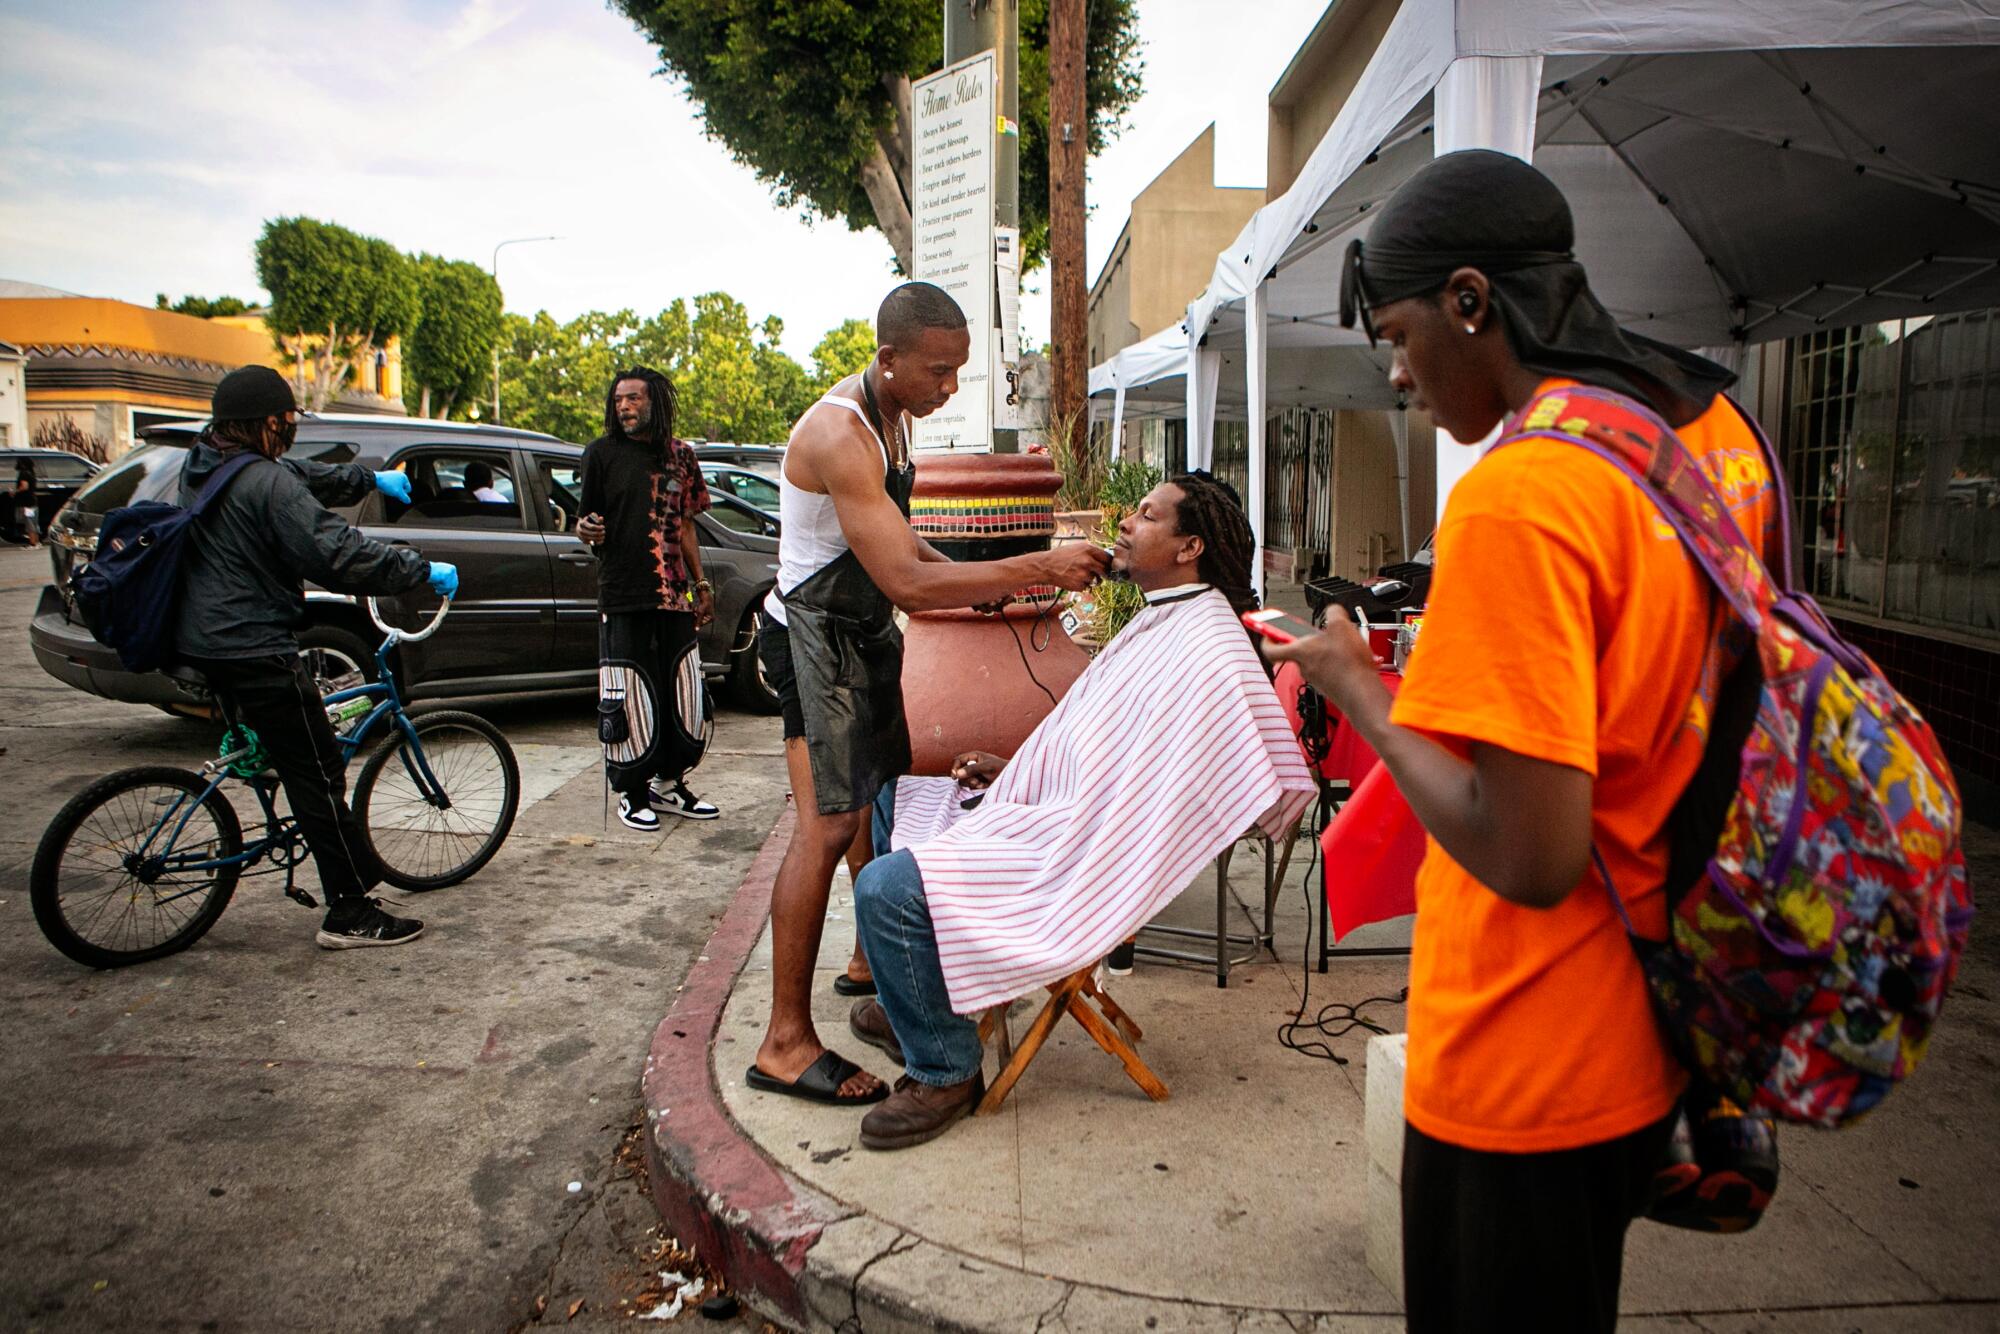 A man gives a haircut to another man on the corner of a street.